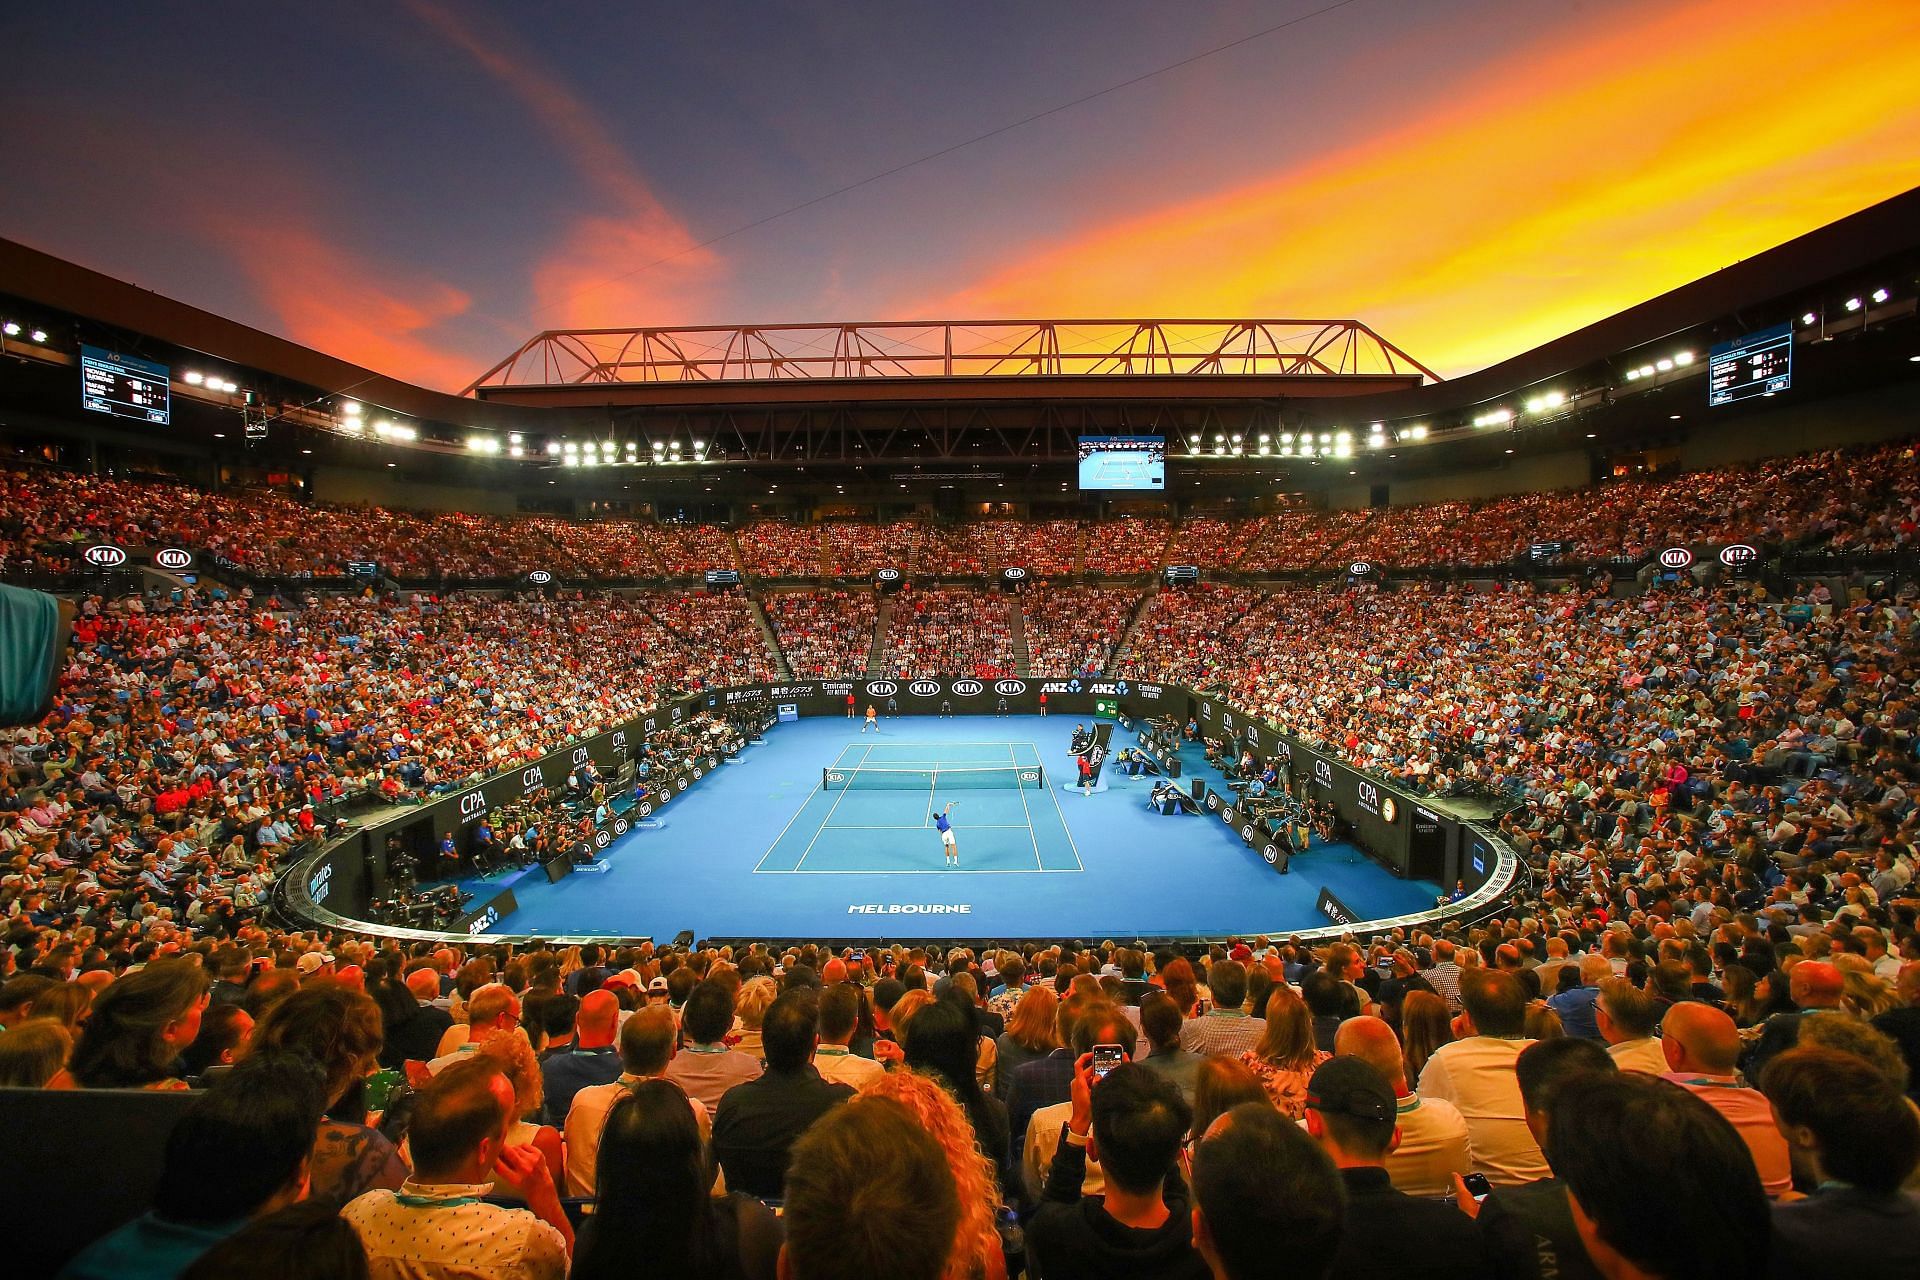 Matches on Rod Laver Arena, the Australian Open&#039;s central showcourt, begin 12 pm local time.